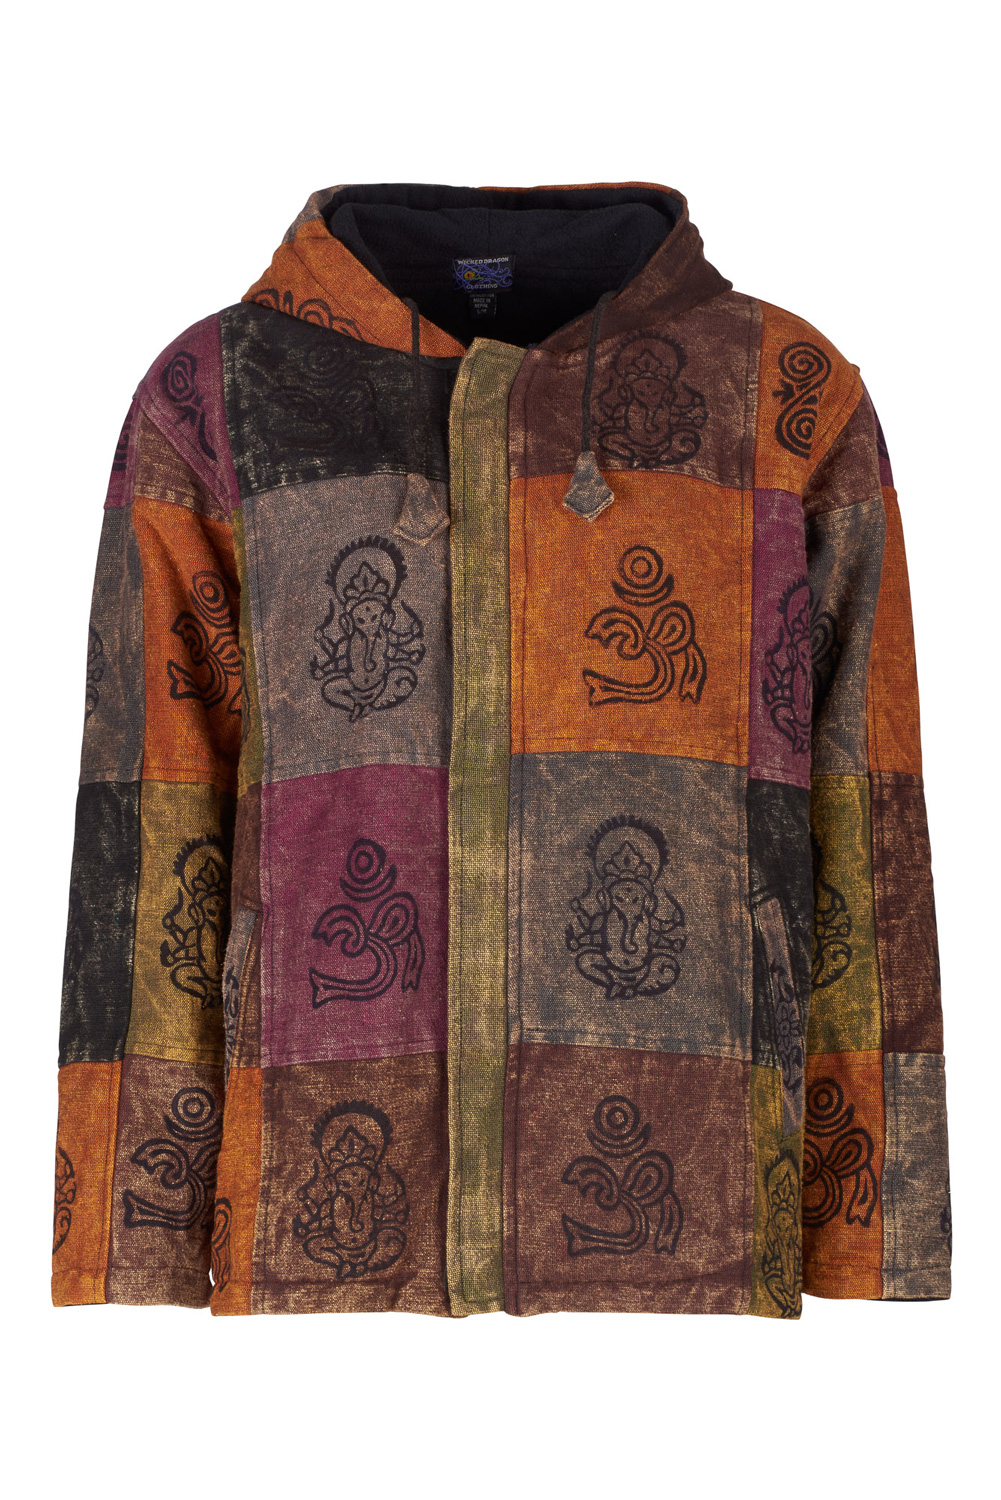 Wicked Dragon Clothing - Fleece lined patchwork hippie hooded jacket